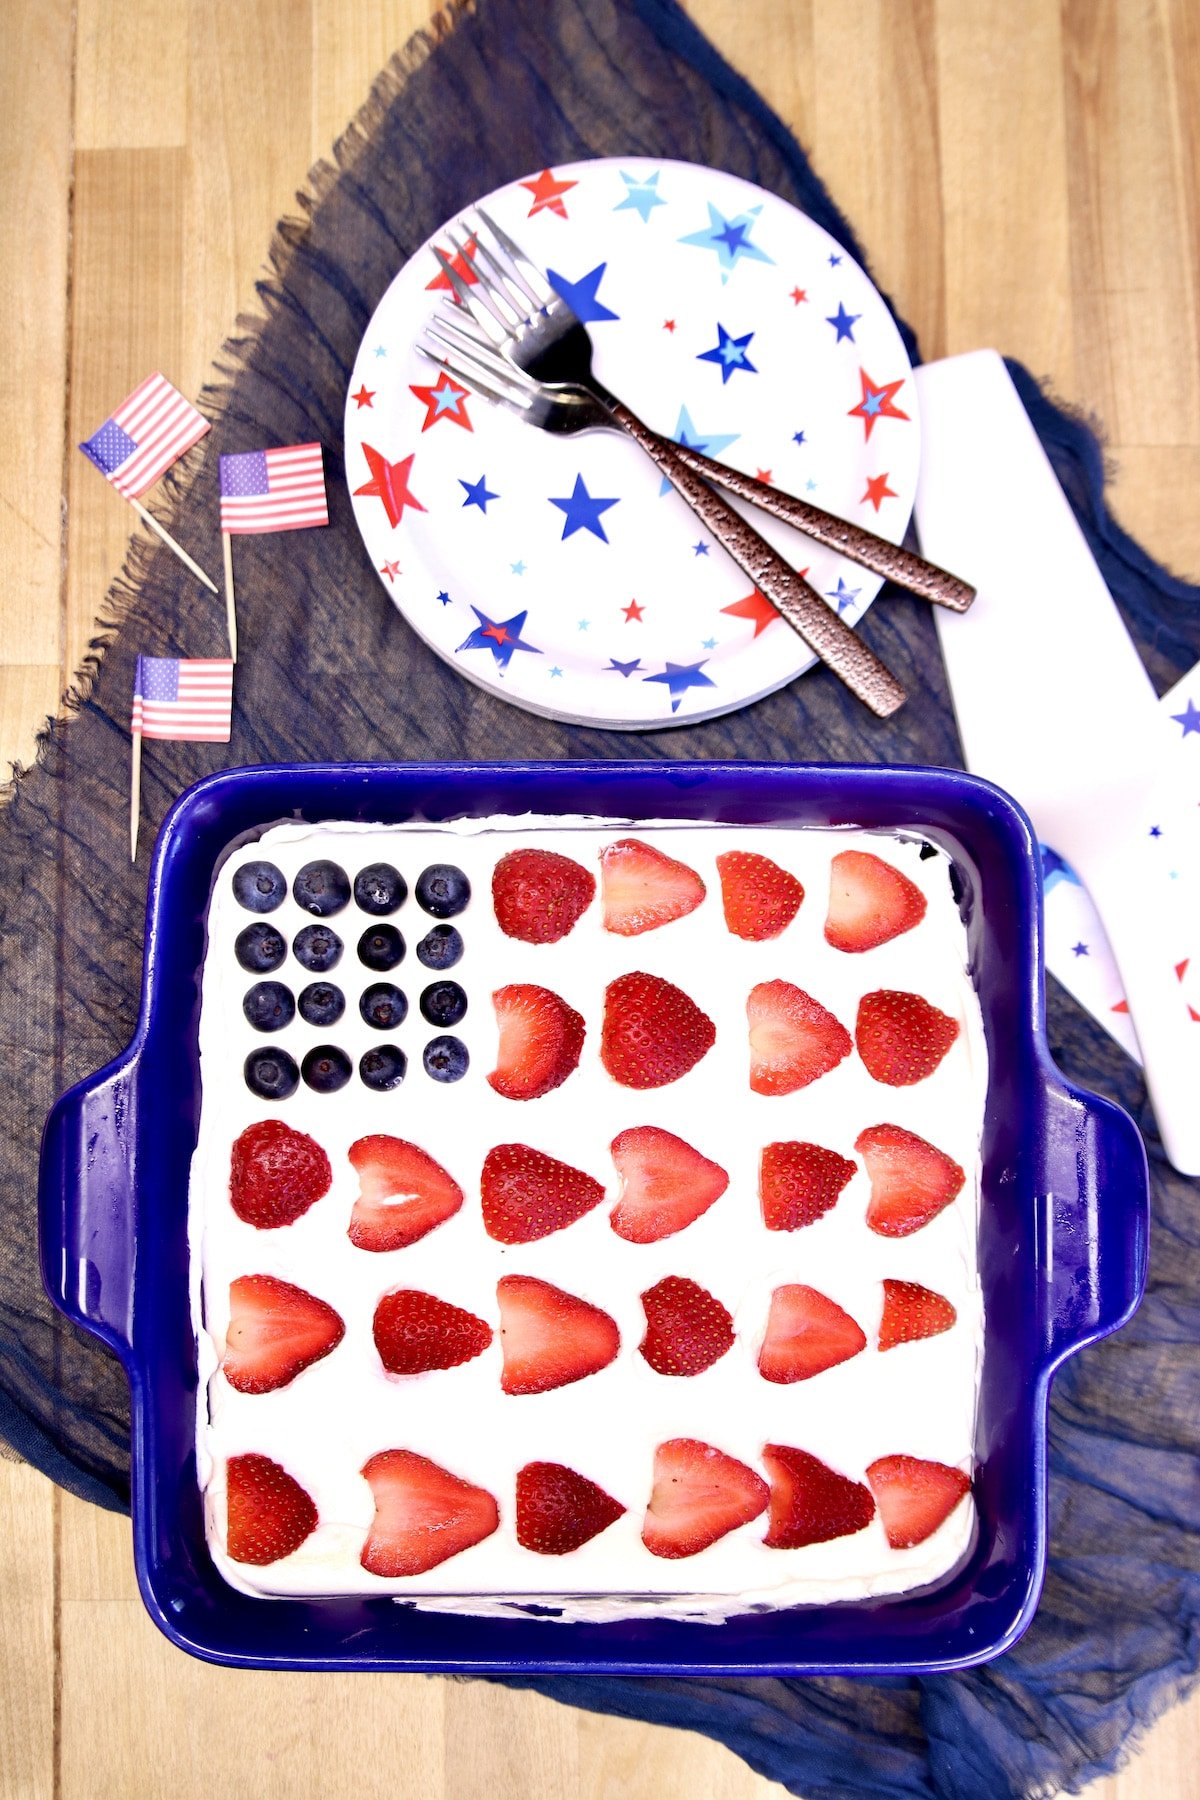 Berry Icebox Cake with American Flag design.